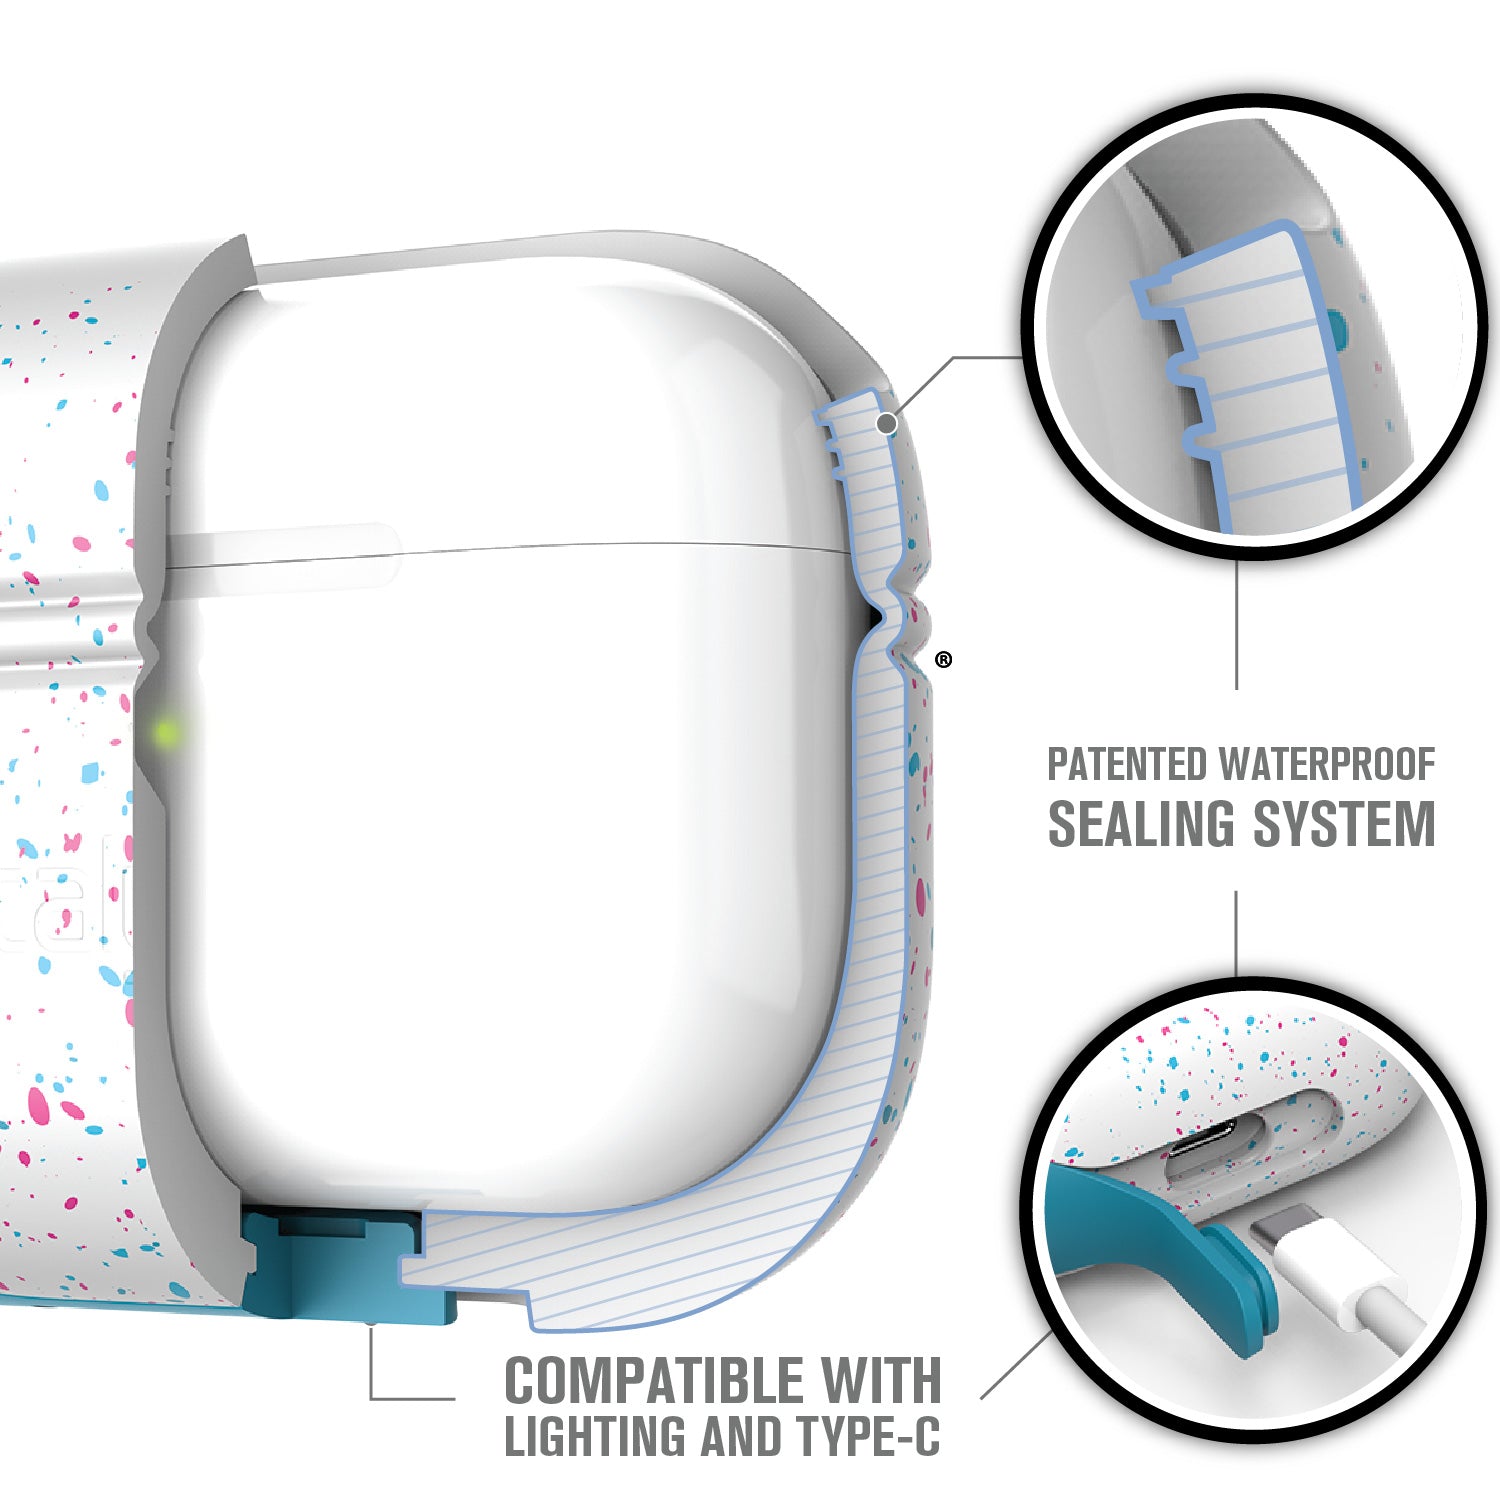 CATAPLAPDPROFUN | catalyst airpods pro gen 2 1 waterproof case carabiner special edition funfetti showing the patented waterproof sealing system texts reads patented waterproof sealing system compatible with lightning and type c